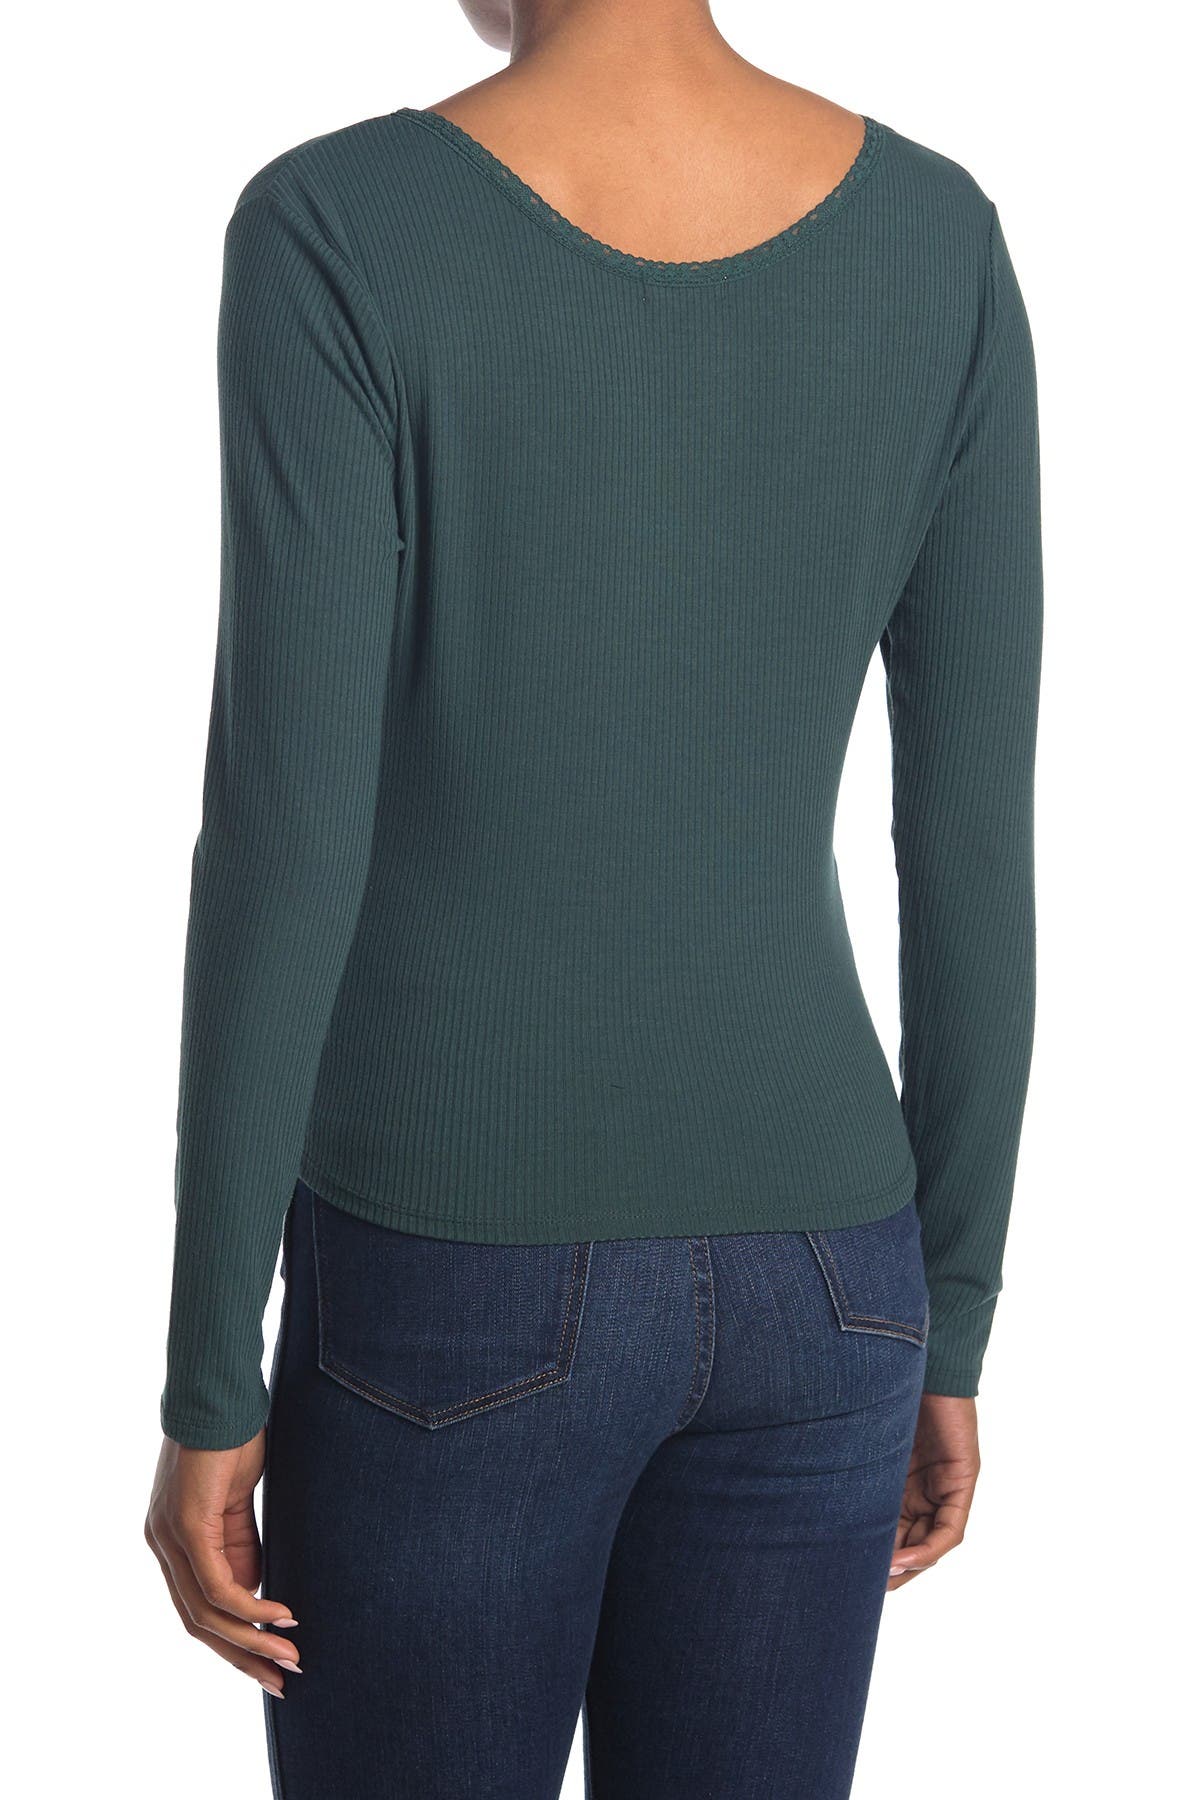 Abound Scoop Neck Long Sleeve Lace Trim T-shirt In Green